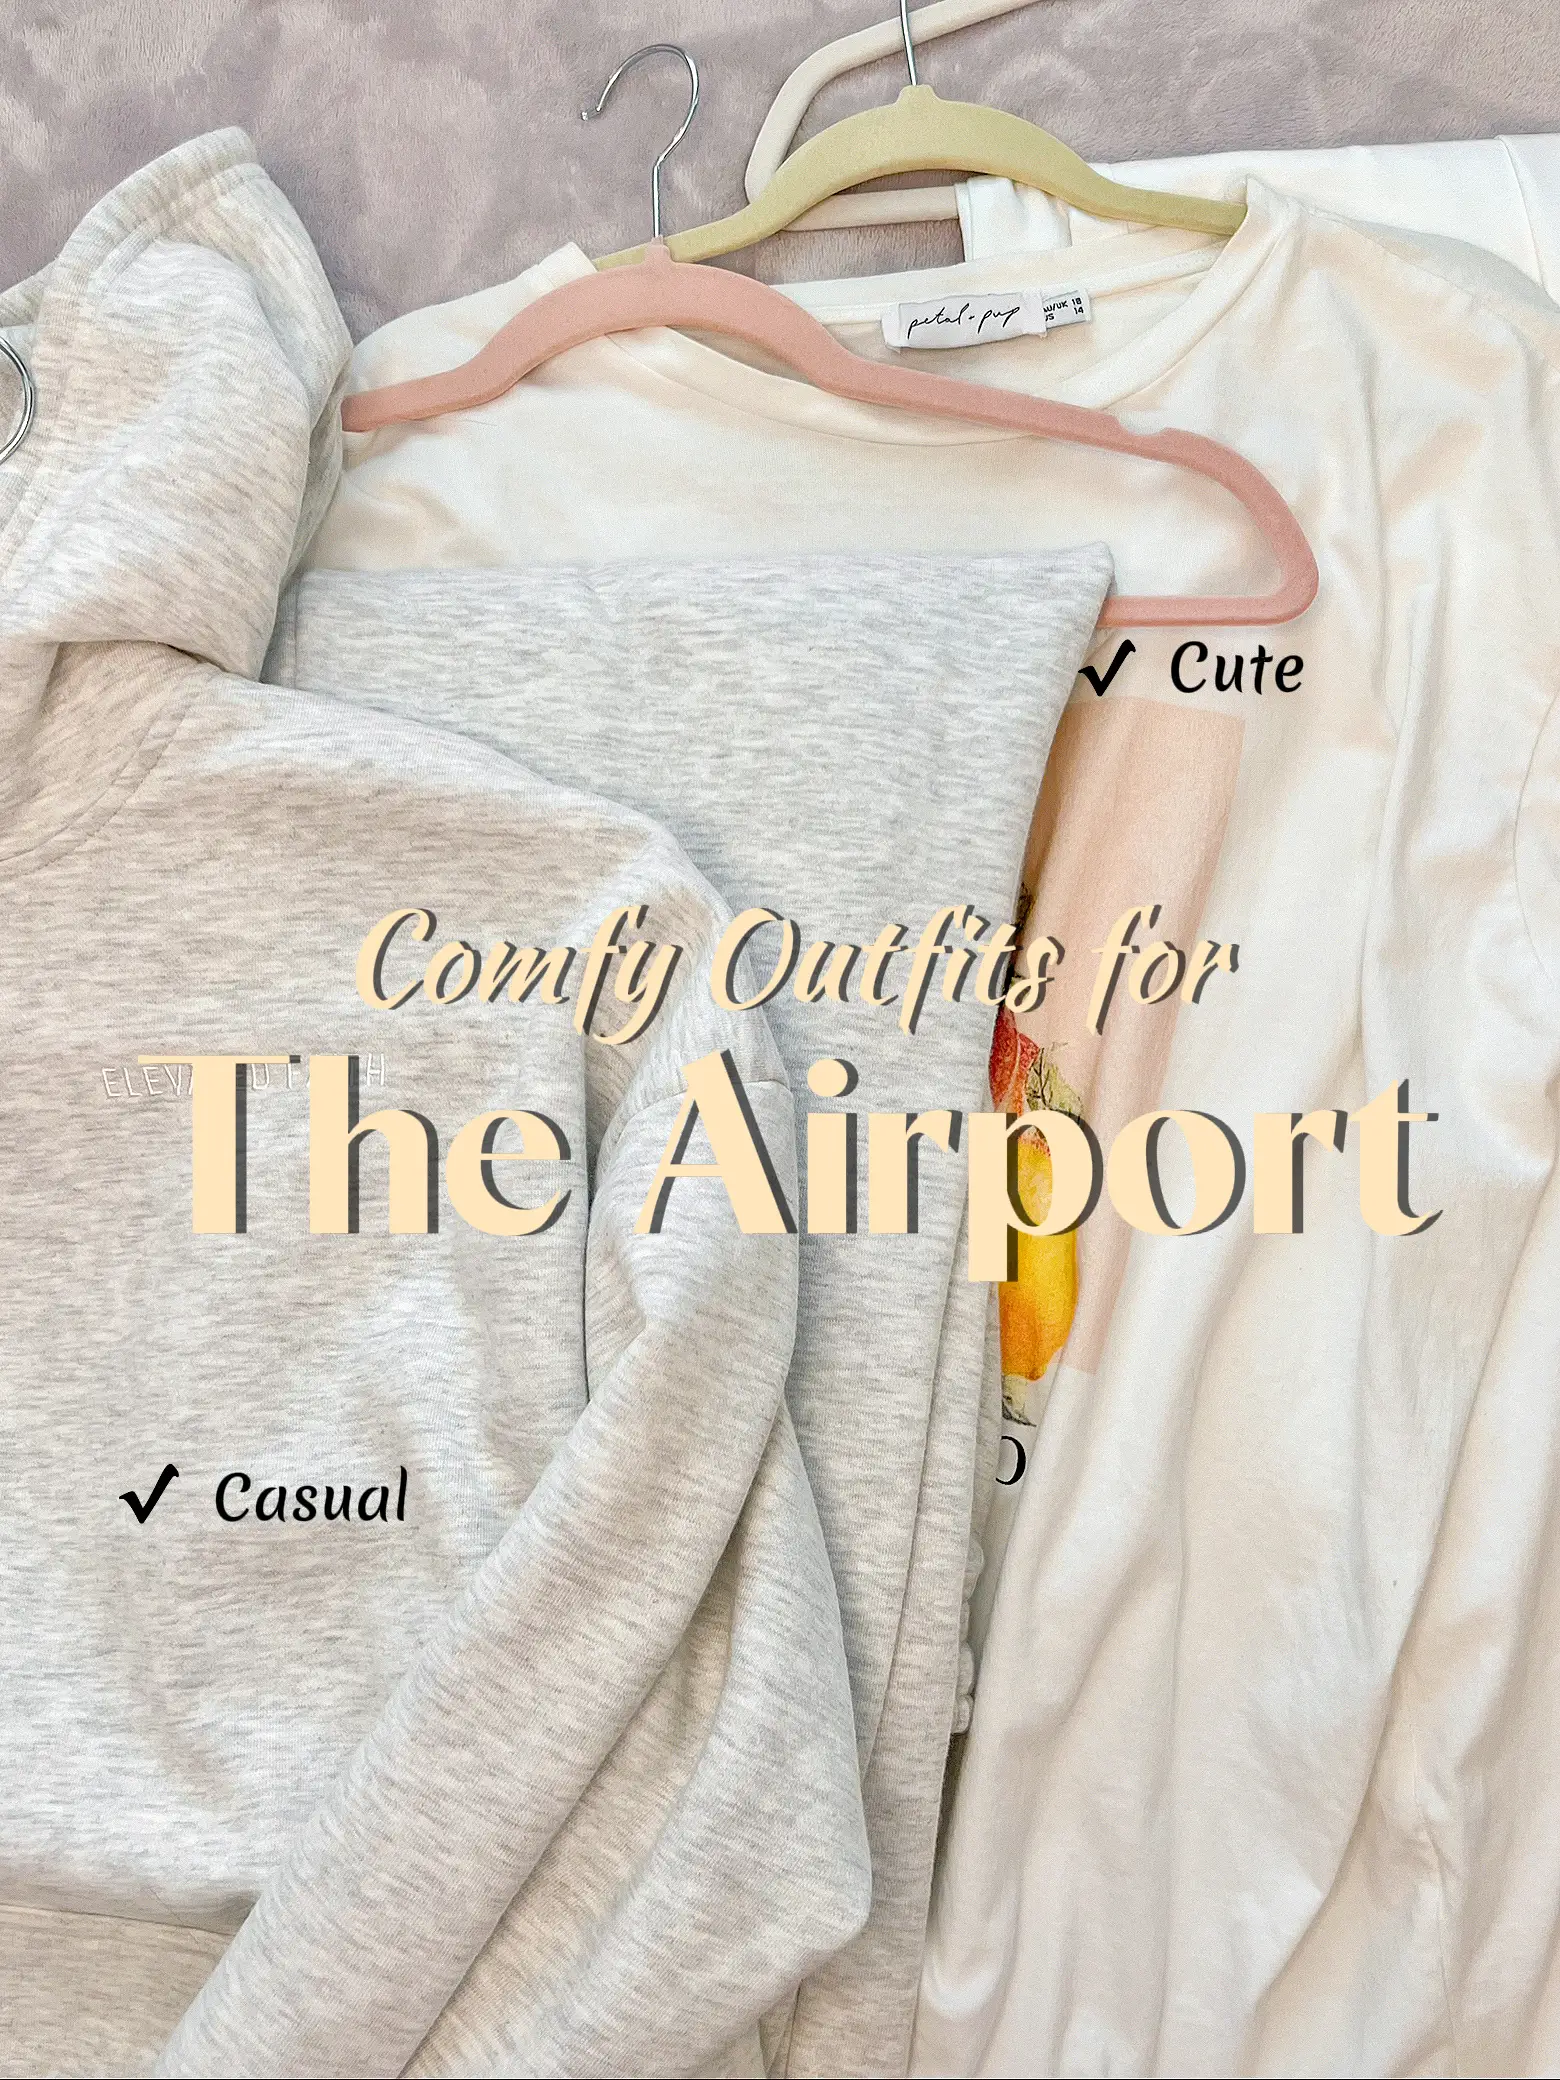 25 Trendy Airport Outfits to Make Traveling More Enjoyable - The Cuddl